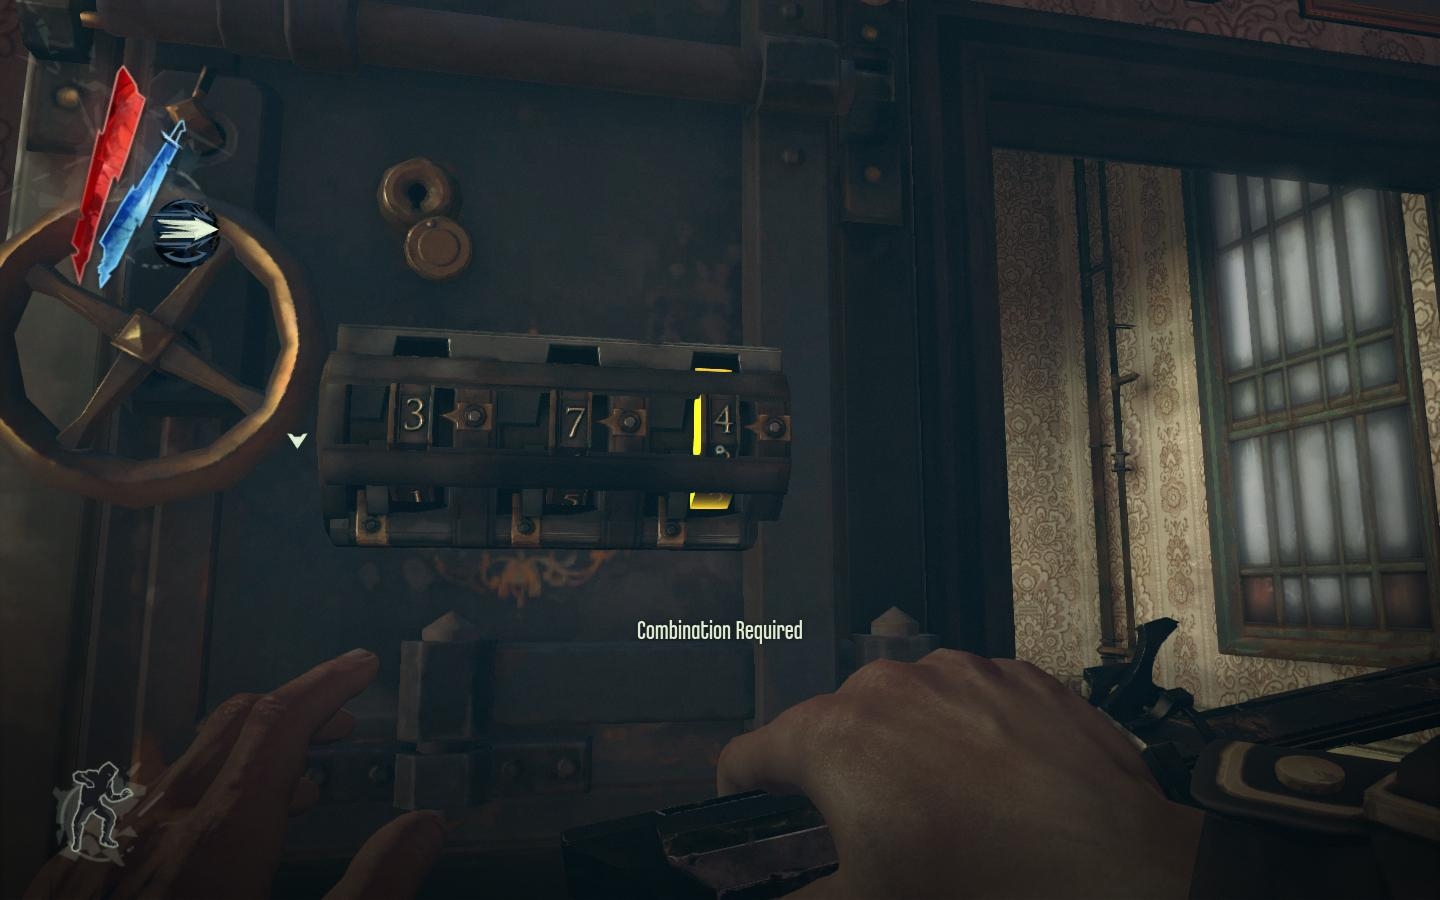 Dishonored 2: How to Open Every Safe